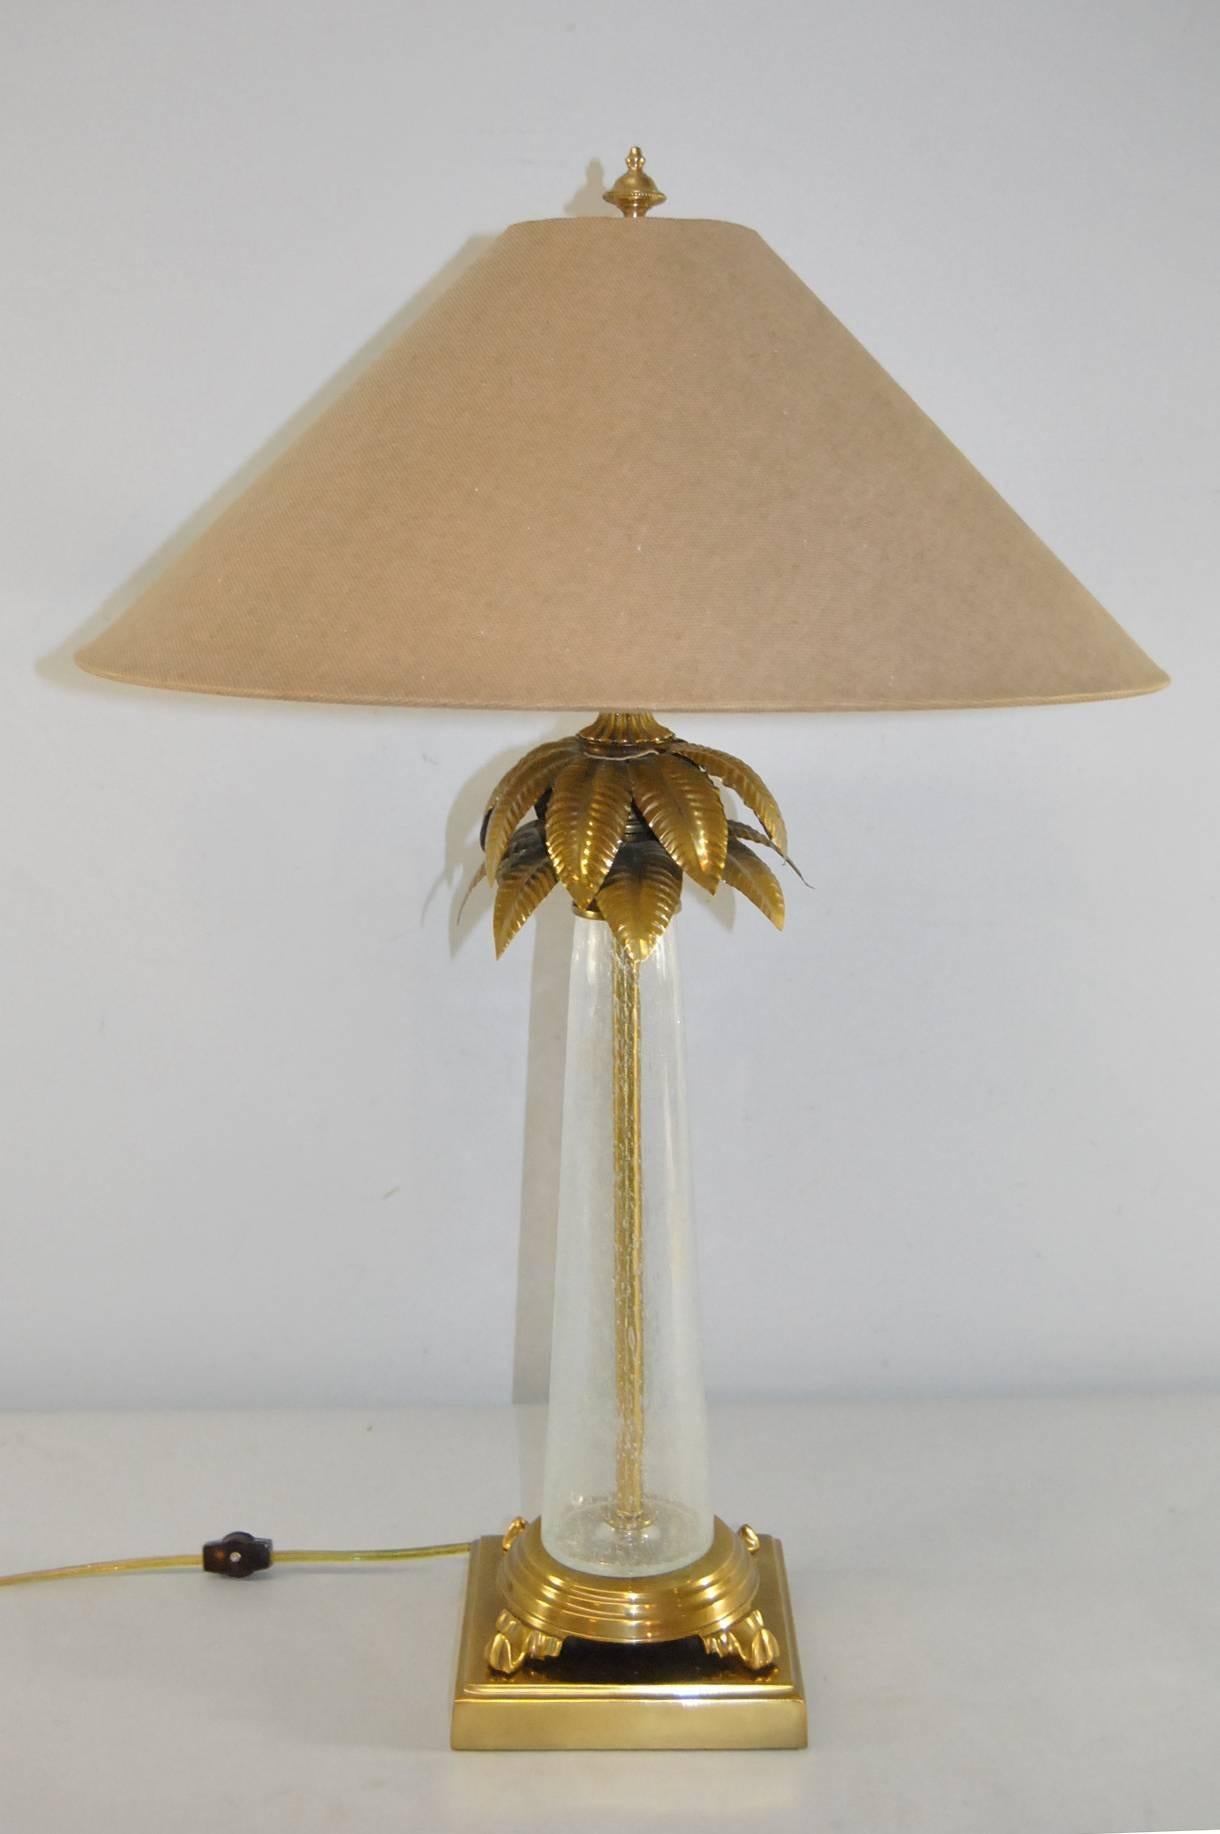 A beautiful hand blown glass table lamp by Frederick Cooper.  This lamp features a brass palm tree detail.  The lamp is signed Frederick Cooper.  The Shade Is Not Included.  